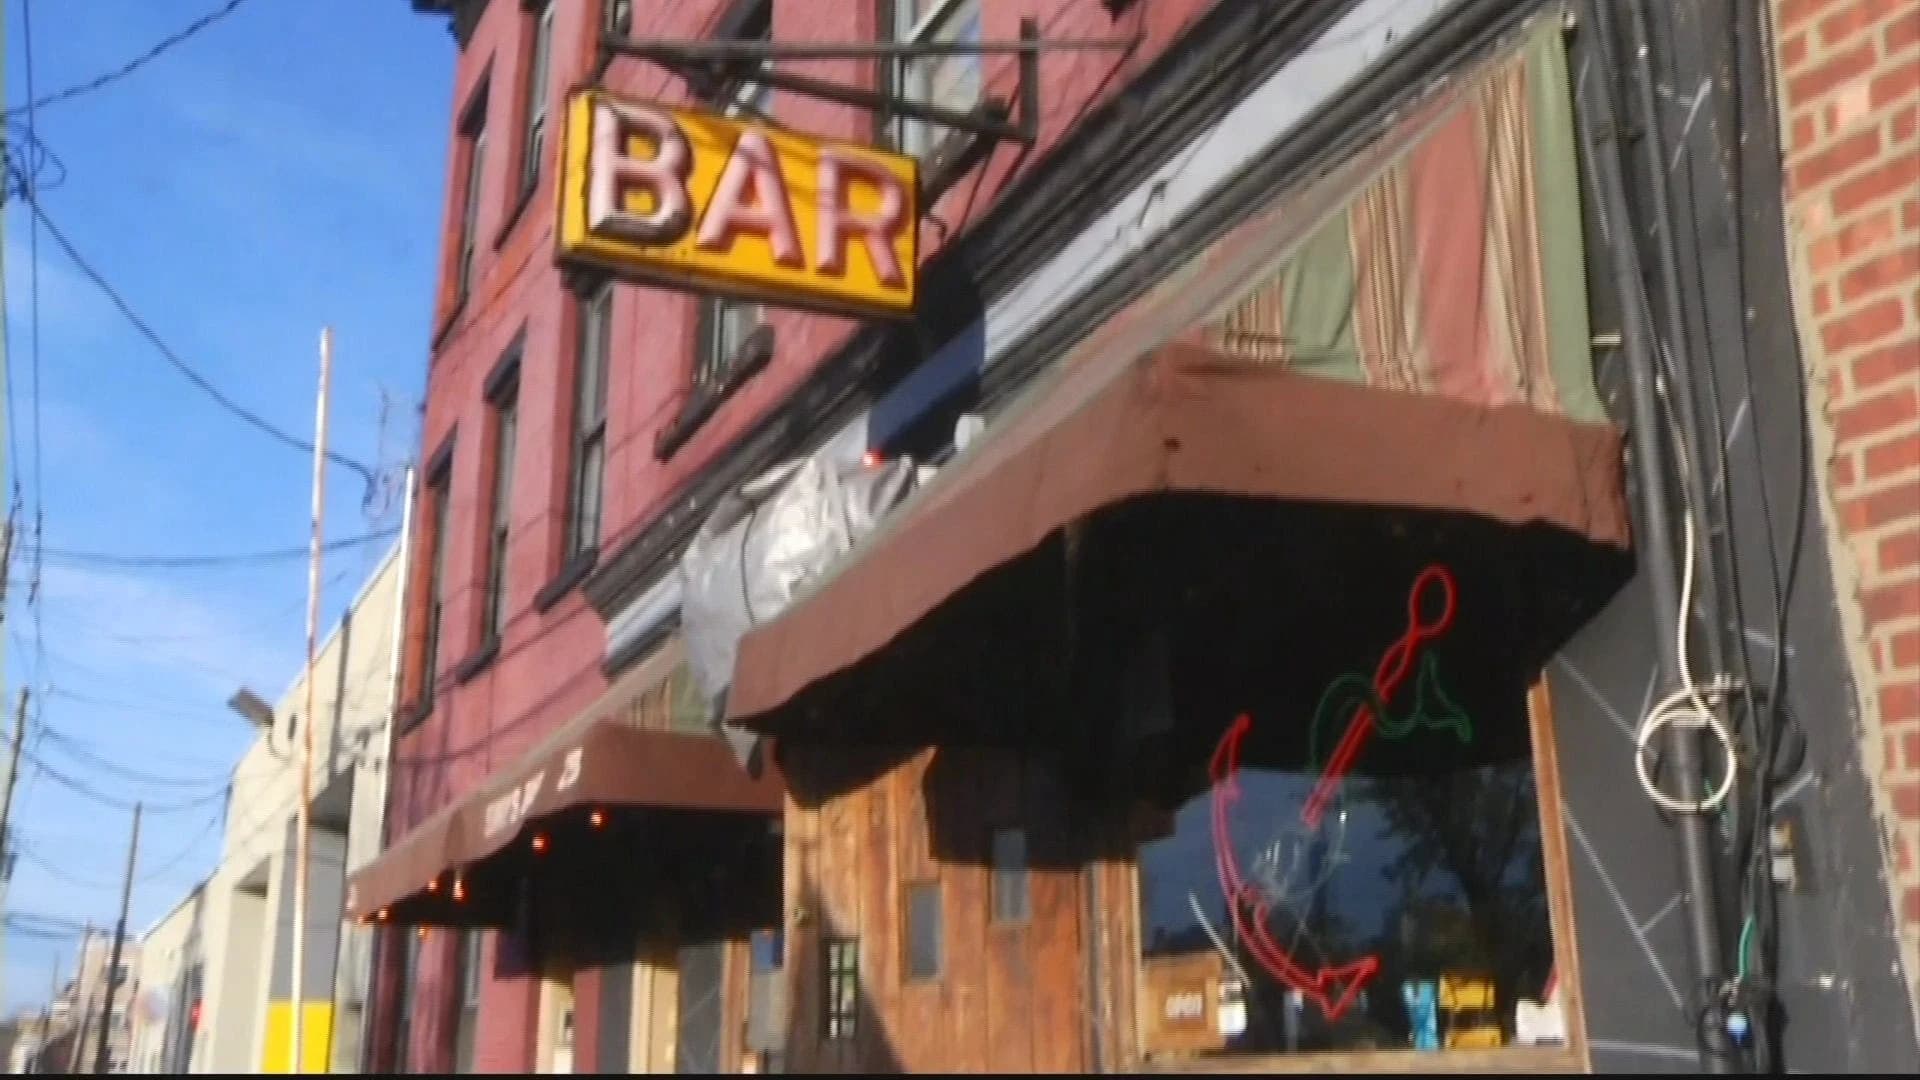 Widow struggles to raise money to save husband’s bar, Sunny’s, in Red Hook